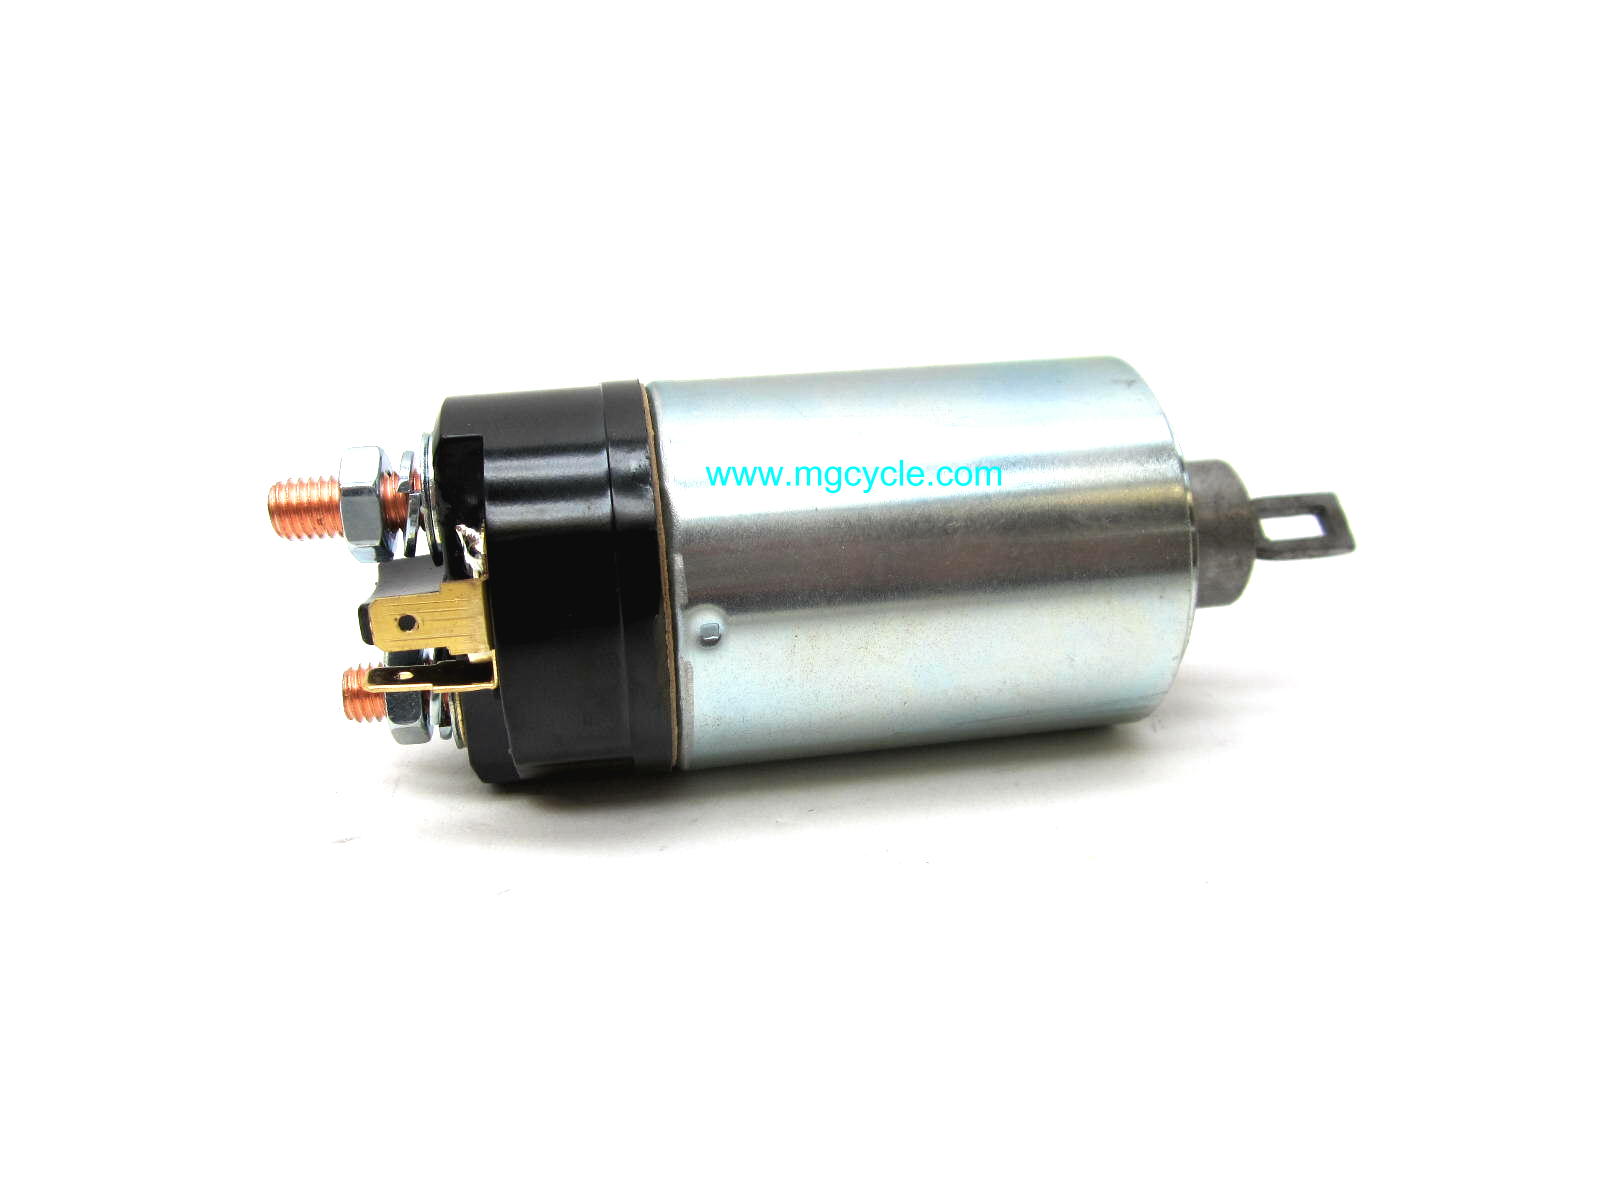 Starter solenoid for Bosch starters 1970's to early 90's - Click Image to Close